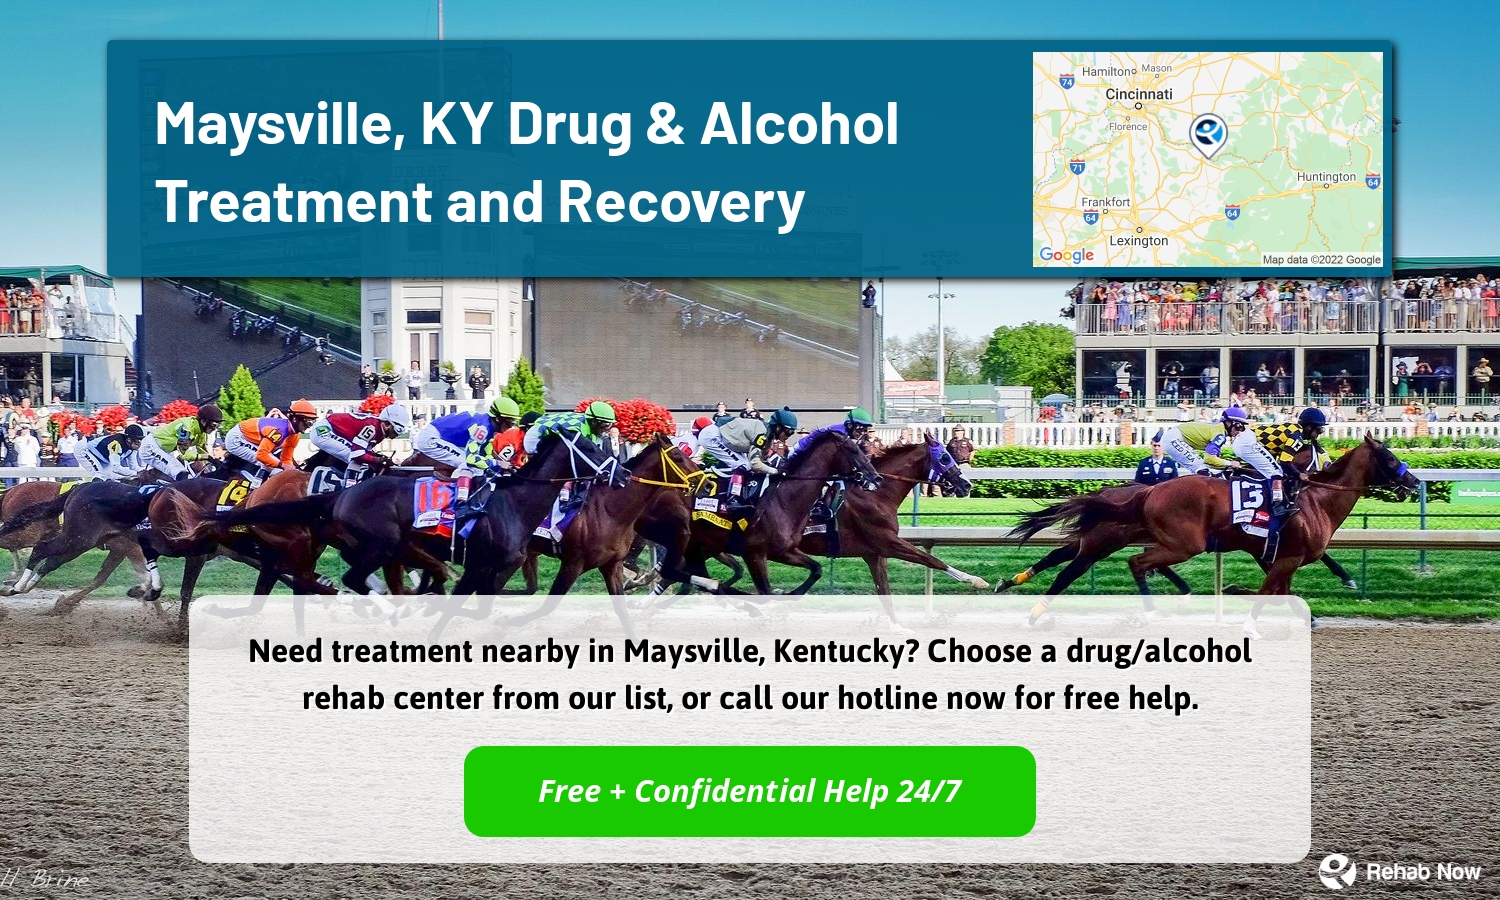 Need treatment nearby in Maysville, Kentucky? Choose a drug/alcohol rehab center from our list, or call our hotline now for free help.